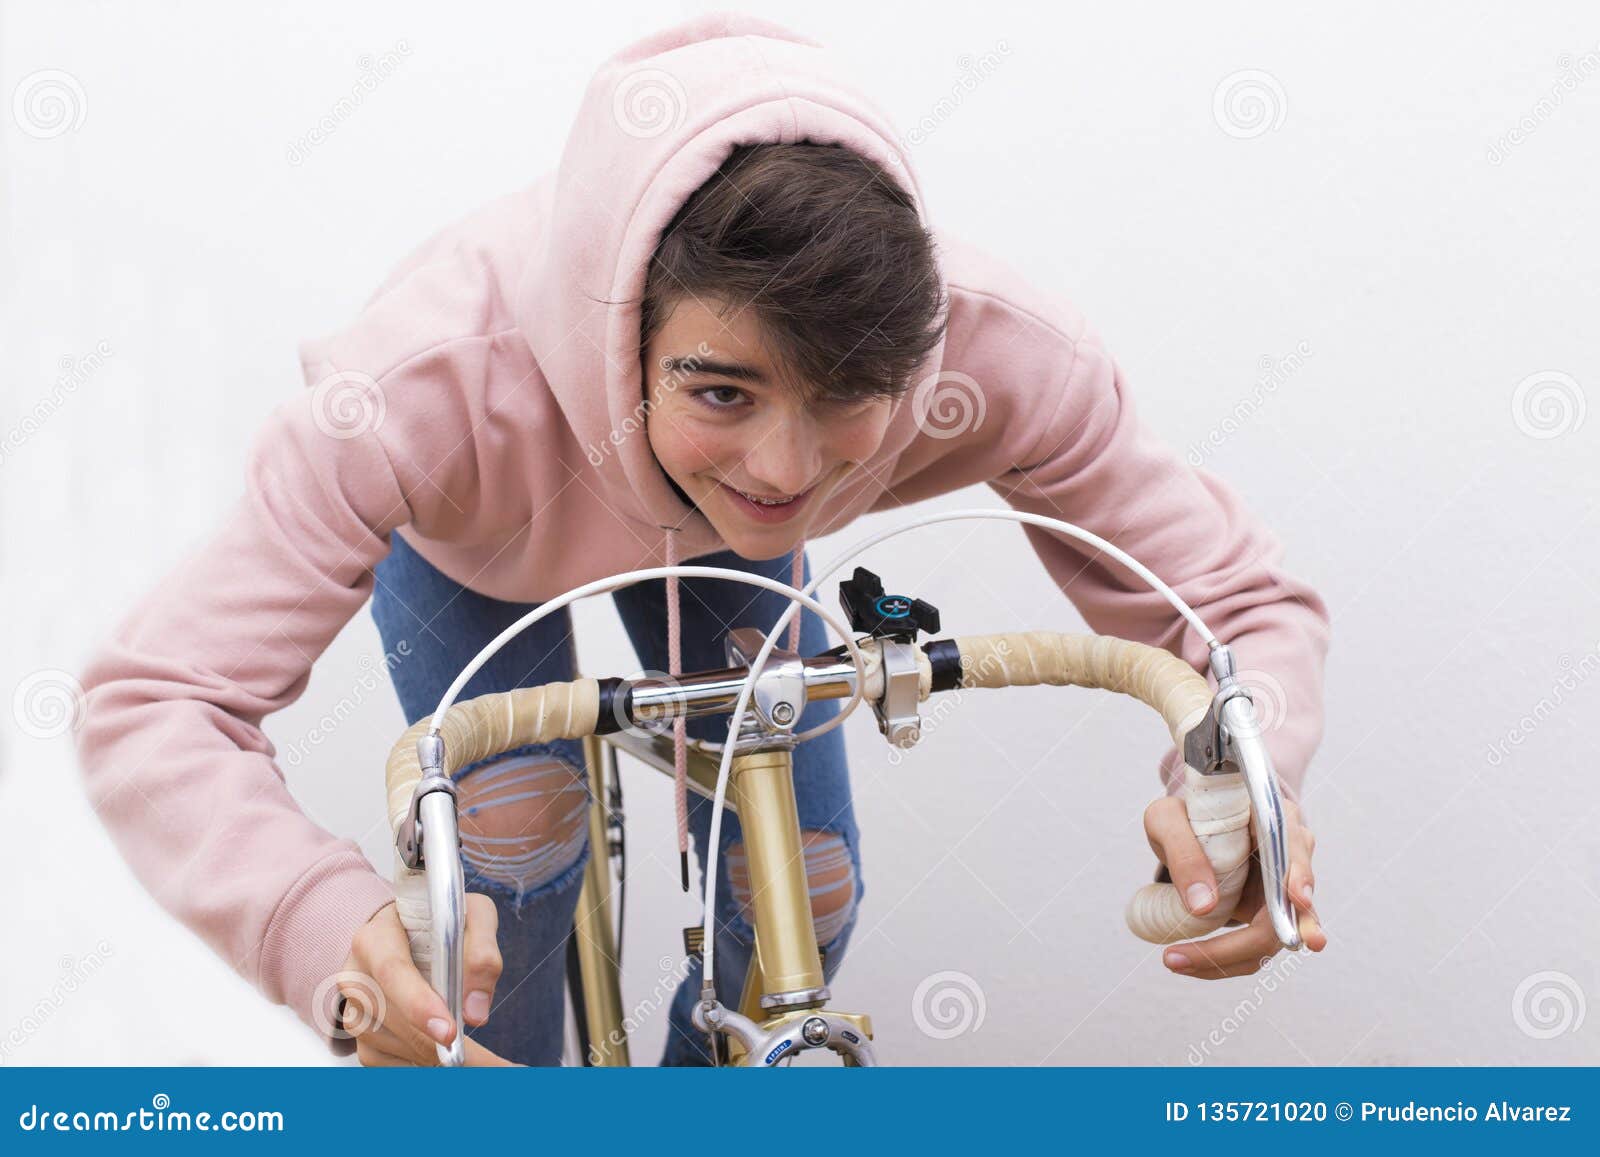 Young man on bicycle stock photo. Image of culture, hipster - 135721020